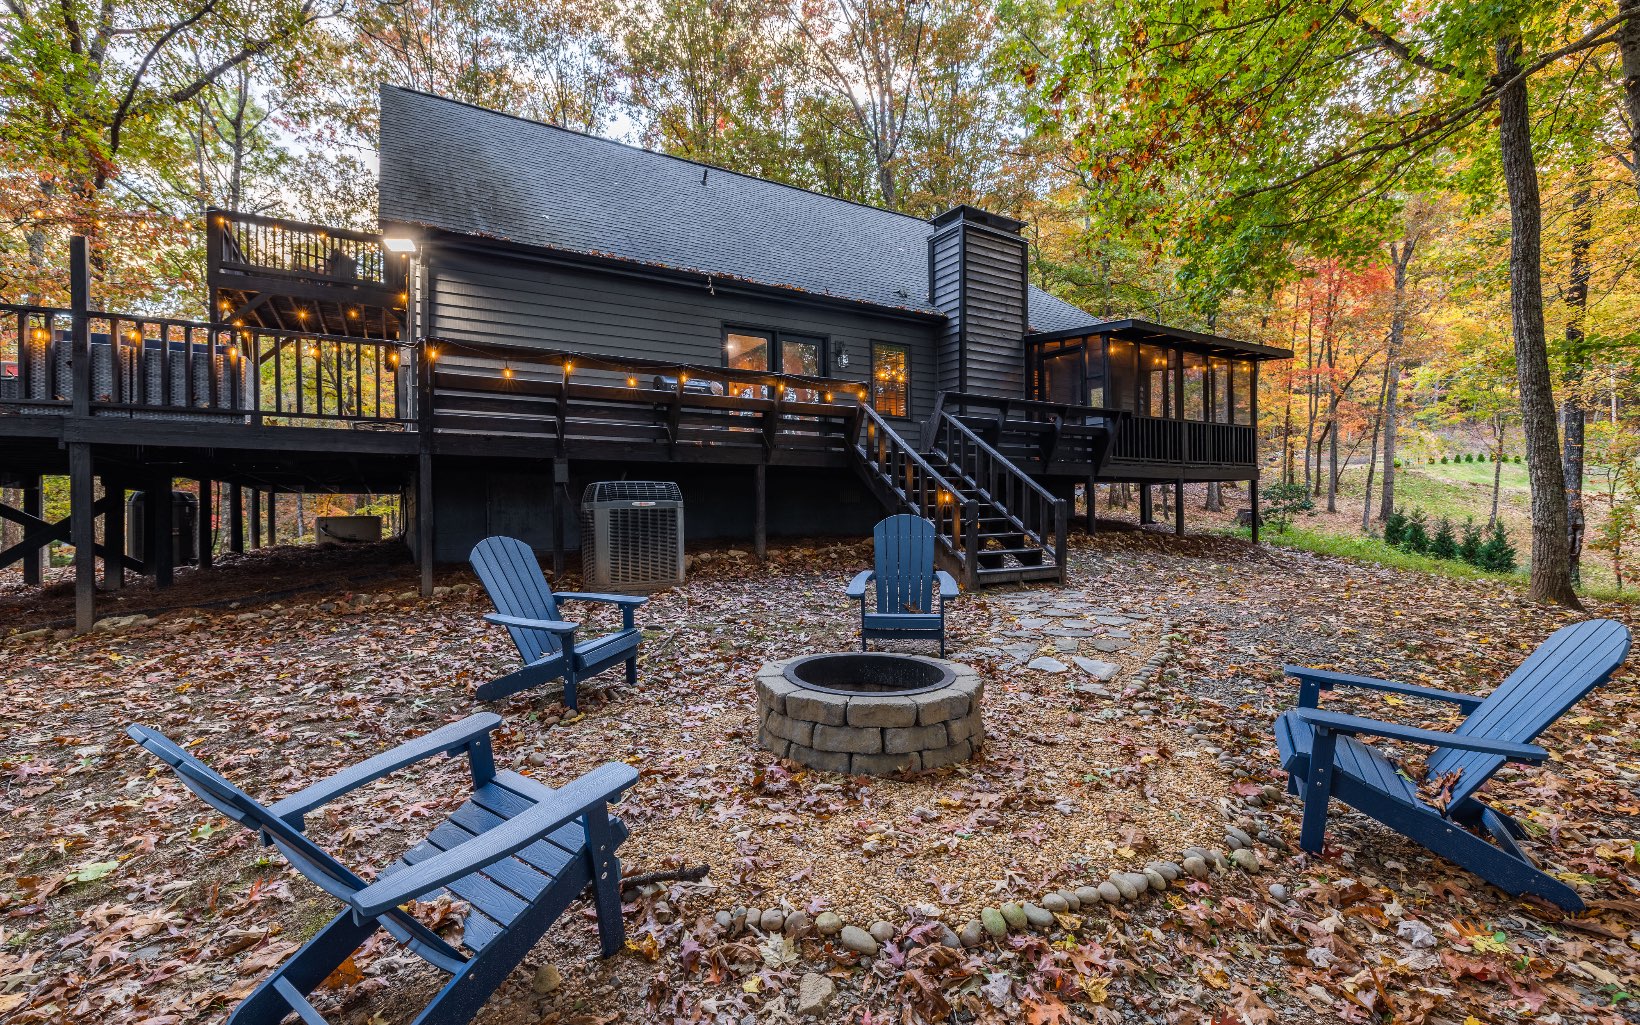 Turn Key Rental Opportunity within minutes from the Brand New Fightingtown Nature Park with well kept biking & hiking trails! Are you looking for an extraordinary Blue Ridge escape that's both luxurious and rustic? Welcome to this one-of-a-kind, newly remodeled mountain home! Boasting a unique experience, you will find gorgeous wood beams in the ceiling and checkered flooring that give it an inviting atmosphere. In this 3 bed, 2 bath open-concept living design you will enjoy plenty of dining and living space perfect for large gatherings, a spacious kitchen for those chef enthusiast with brand new appliances, gorgeous stone fireplace, hardwood floors, tile showers, quality furnishings, whole house generator, laundry room on the main, and an arcade game room that adds an extra layer of fun. With plenty of deck space you can enjoy those stunning seasonal views or make your way down to the expansive outdoor area perfect for entertaining guests. Take advantage of the outdoors with Fightingtown Creek Access - all while nestled in the Laurel Crossing area just minutes from downtown experiences. Whether your ready to move-in or continue its rental income opportunities; it’s truly a winning combination. Don’t miss out on experiencing life in Blue Ridge – it truly is unforgettable!